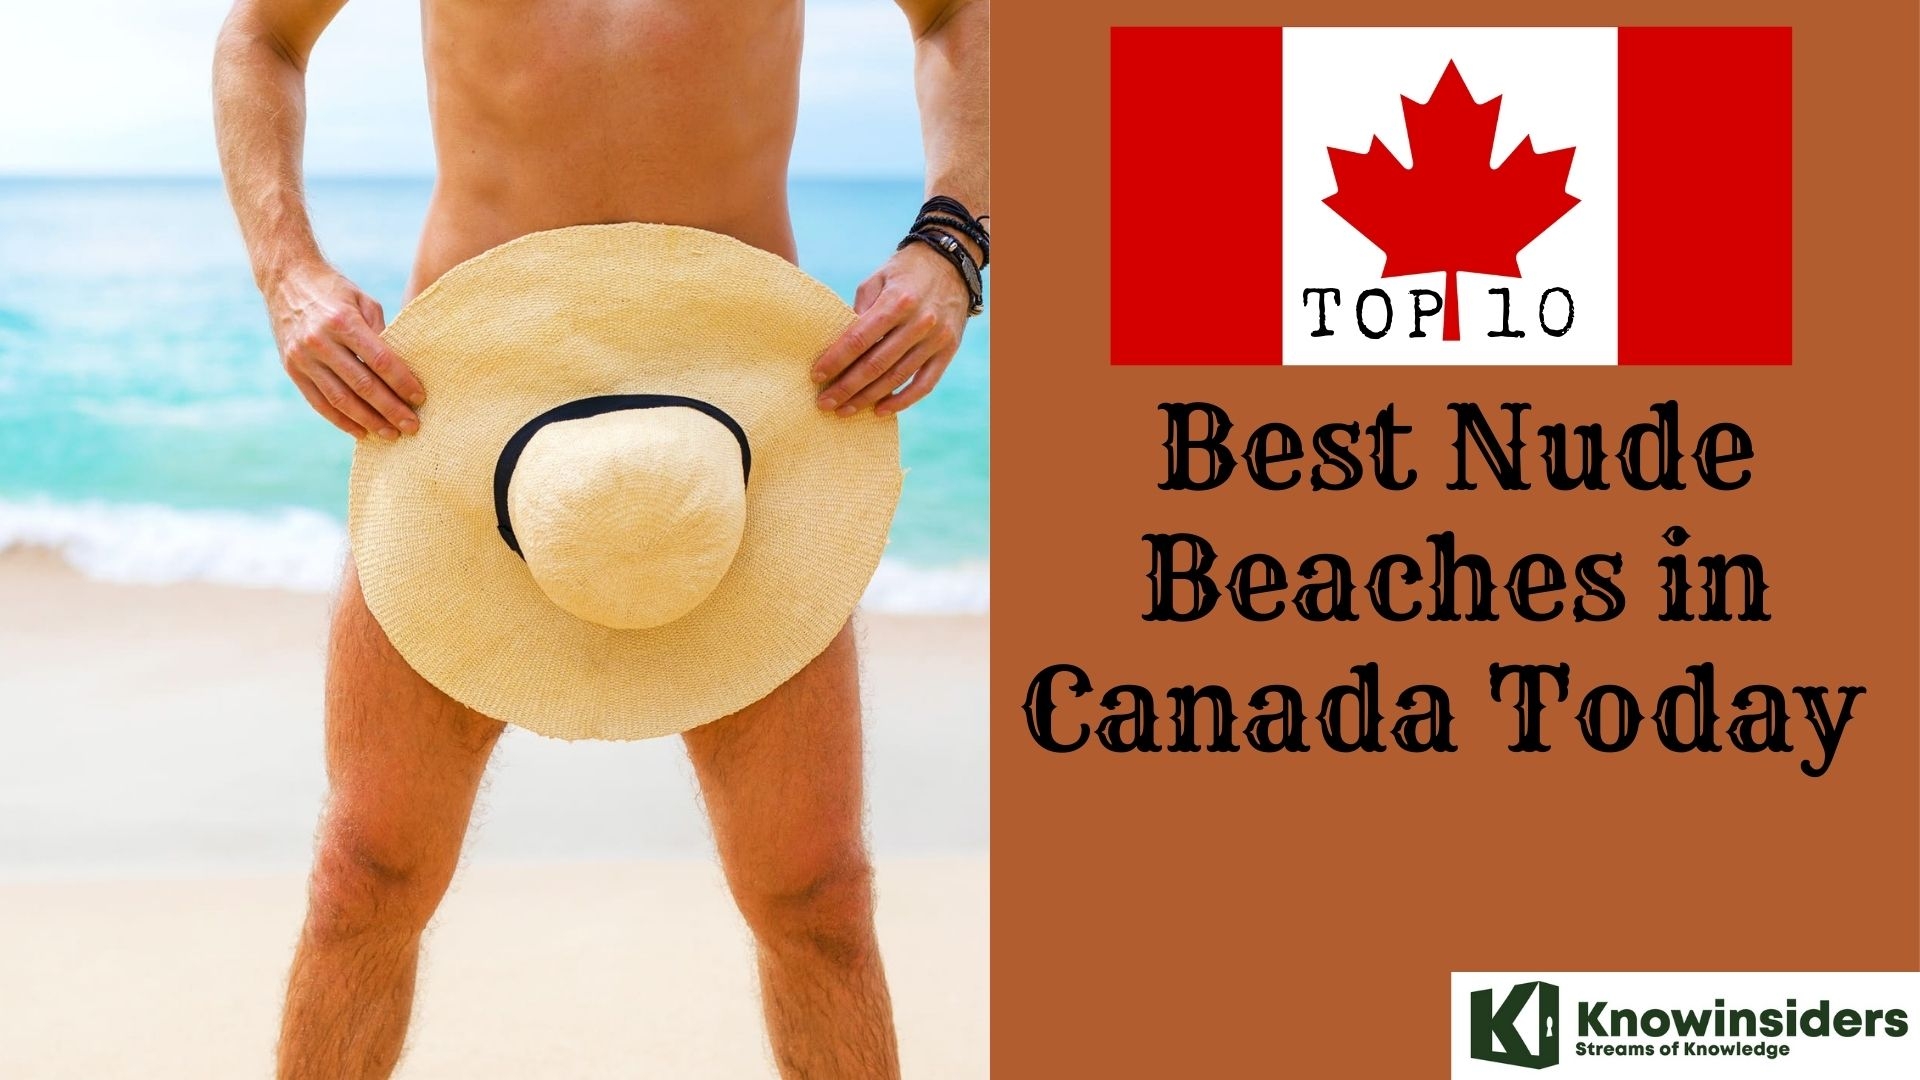 Top 10 Best Nude Beaches in Canada Today 